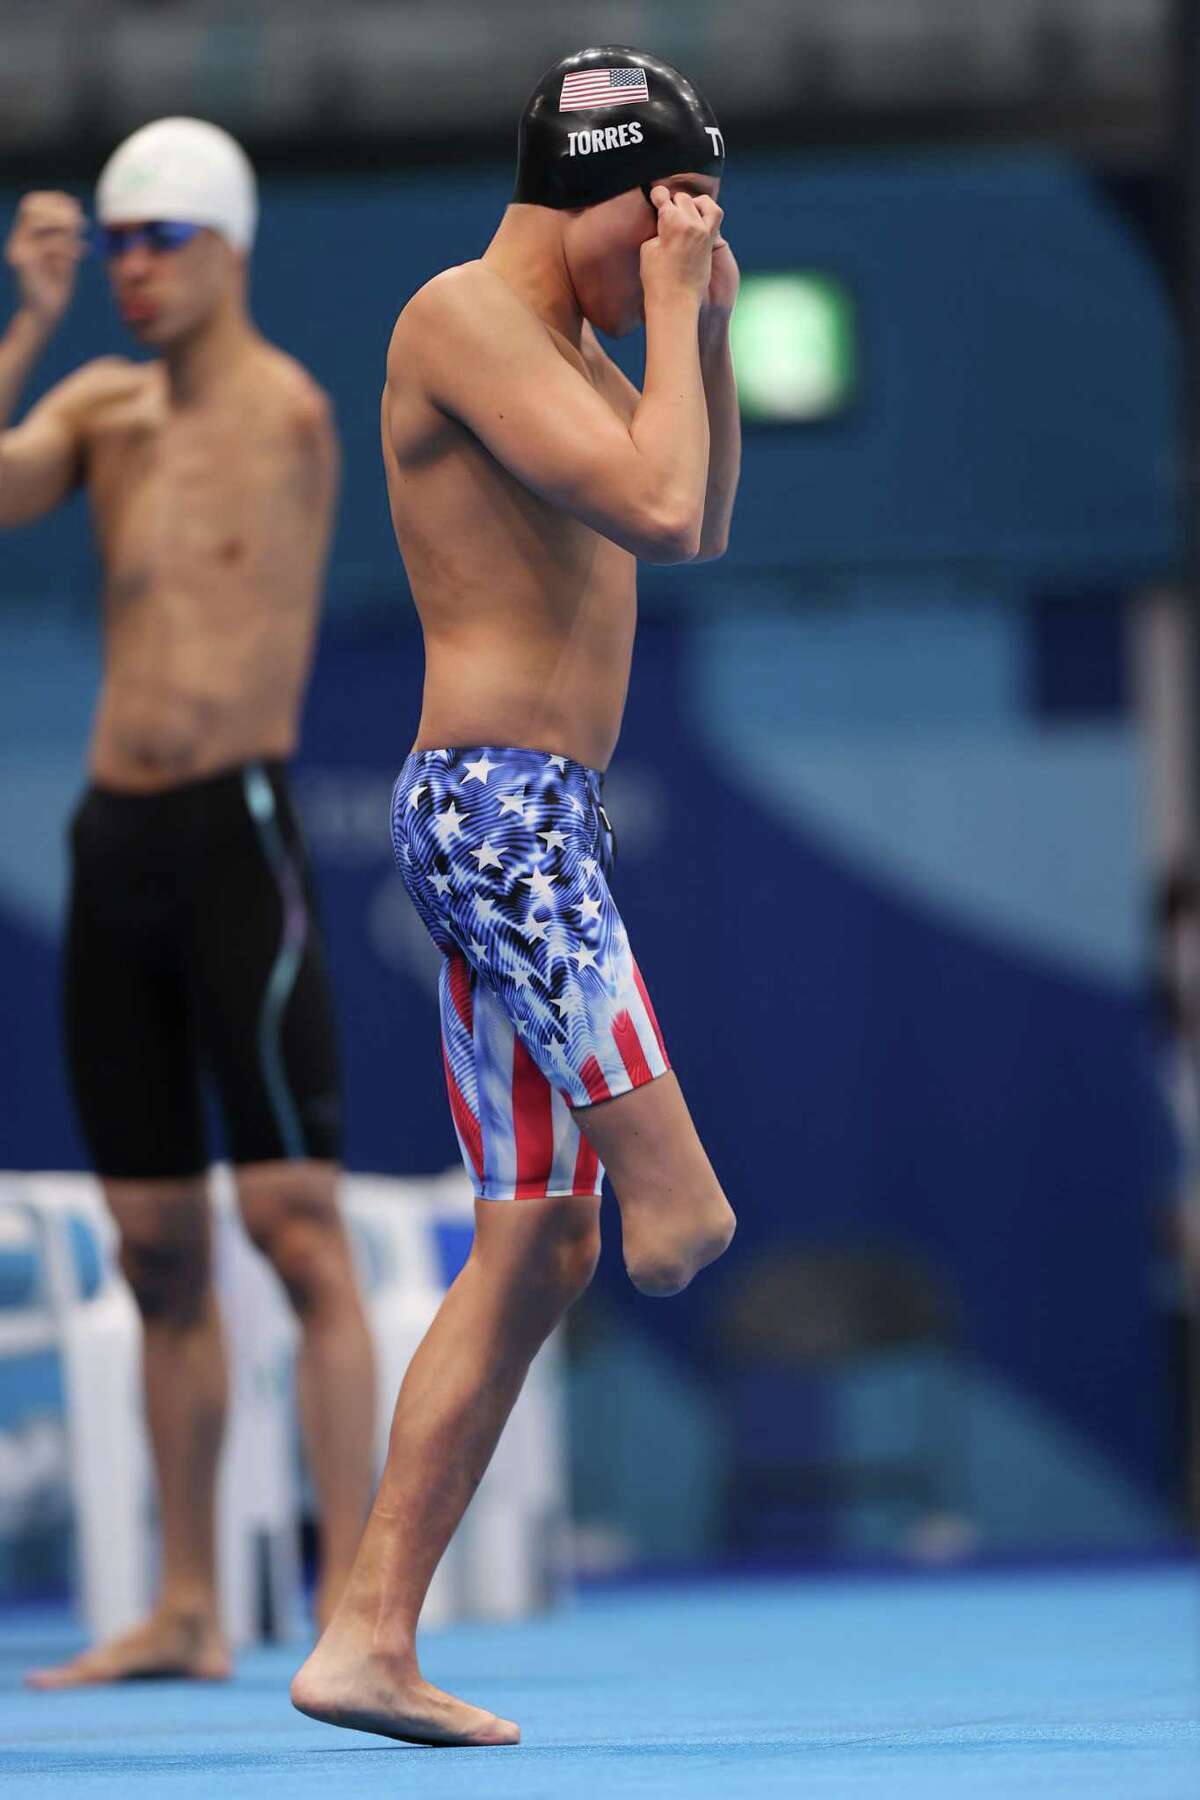 TOKYO, JAPAN - AUGUST 31: Matthew Torres of Team United States prepares to compete in the Men's 400m Freestyle - S8 Final on day 7 of the Tokyo 2020 Paralympic Games at Tokyo Aquatics Centre on August 31, 2021 in Tokyo, Japan. (Photo by Lintao Zhang/Getty Images)